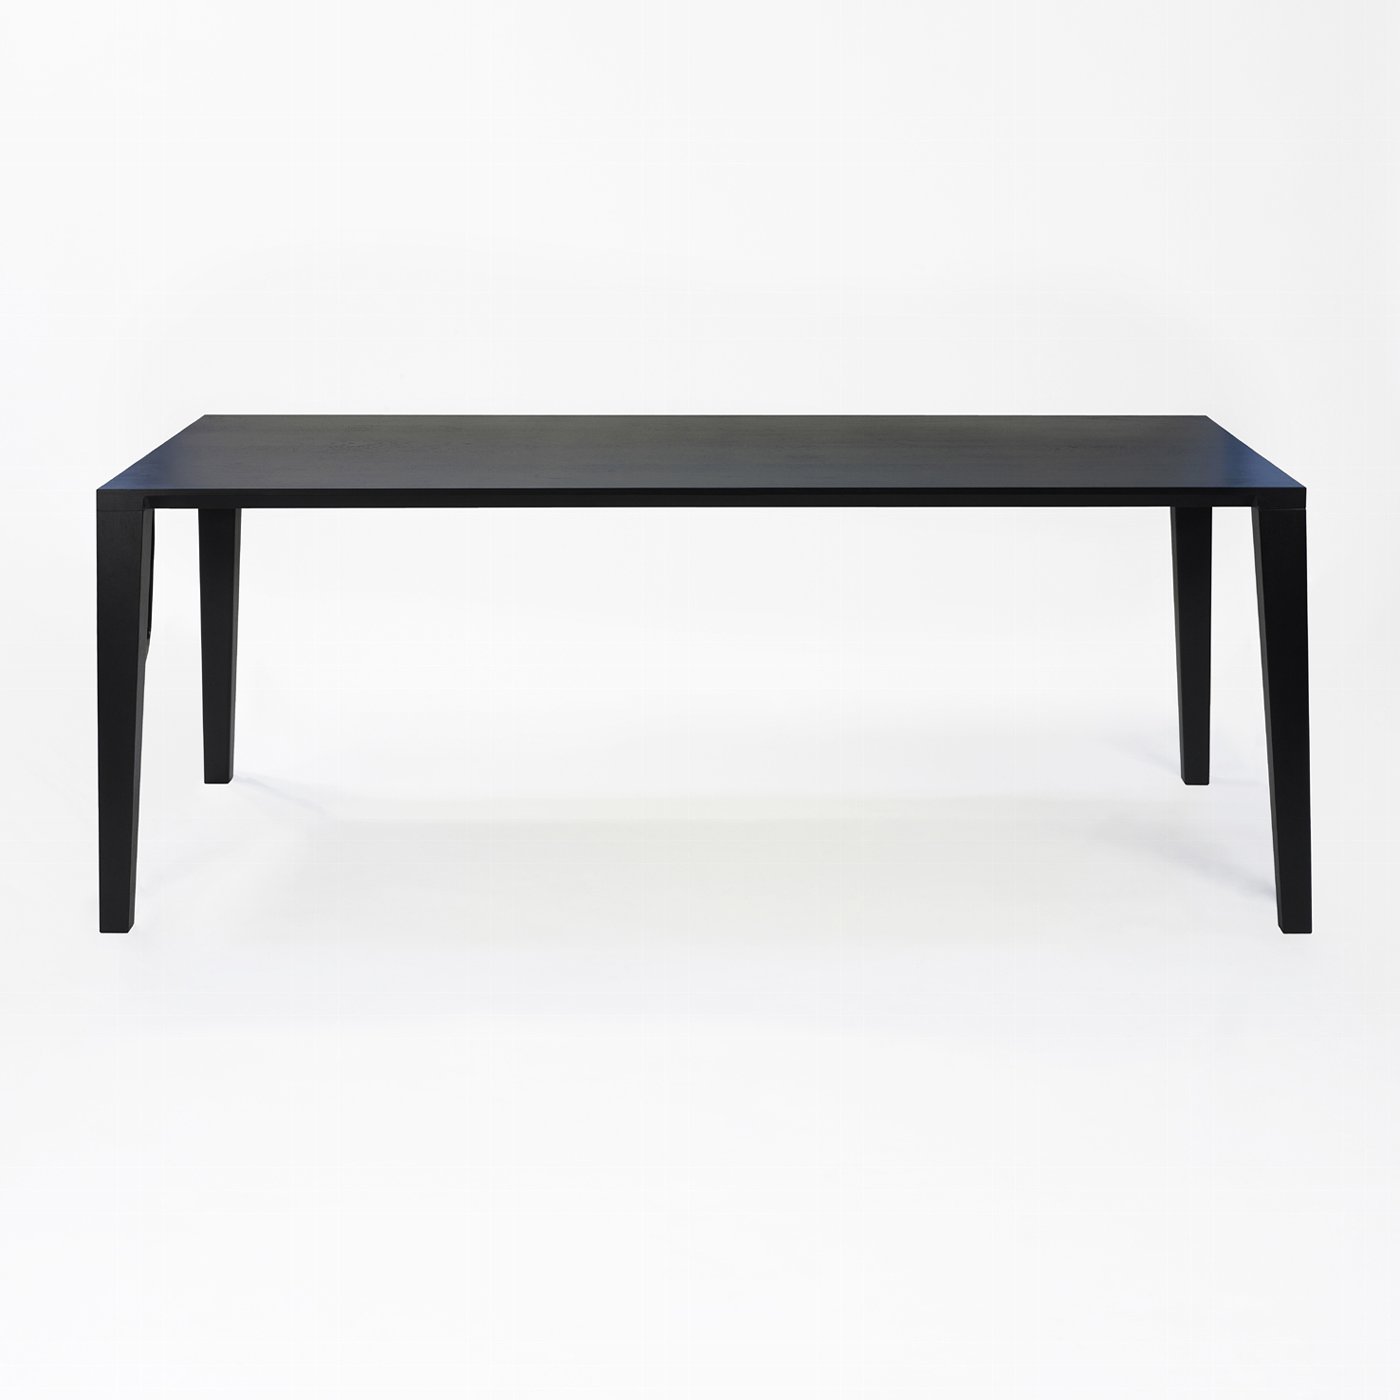 ARACOL  table oak solid black stained